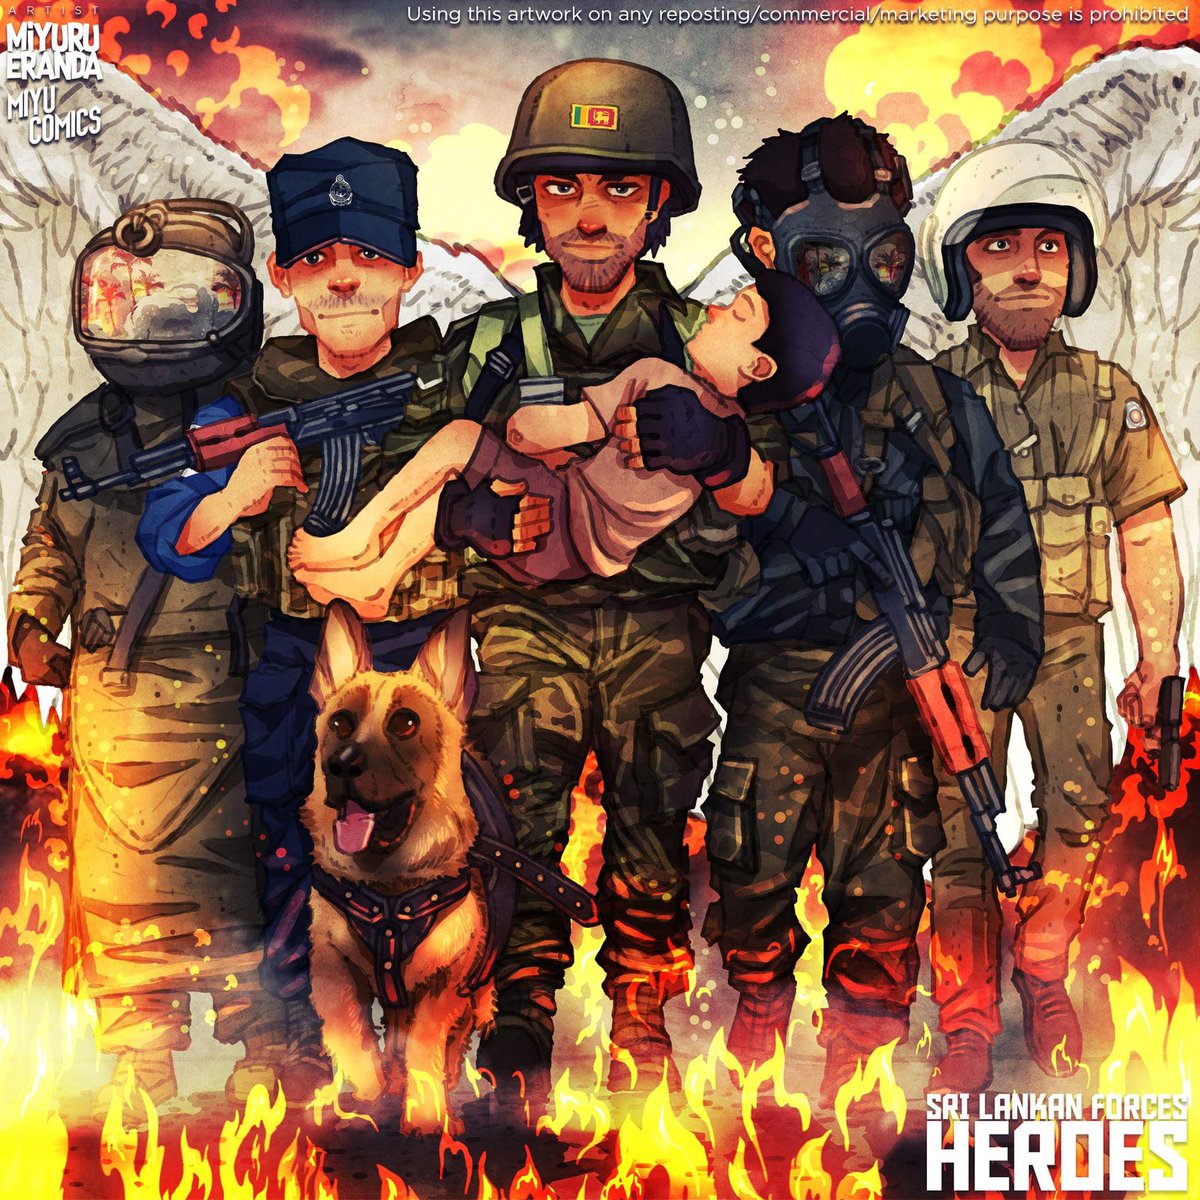 This is our tribute to the true heroes in 'Sri Lankan Forces'
Also it's been 10 years after the death of a hero - Sniper NERO. may your brave soul rest in peace 
 #HopeforSriLanka #Togetherforever #SriLanka #SLForces #Heroes #2k19 #Army #Navy #Police #Airforce #Bombdisposal